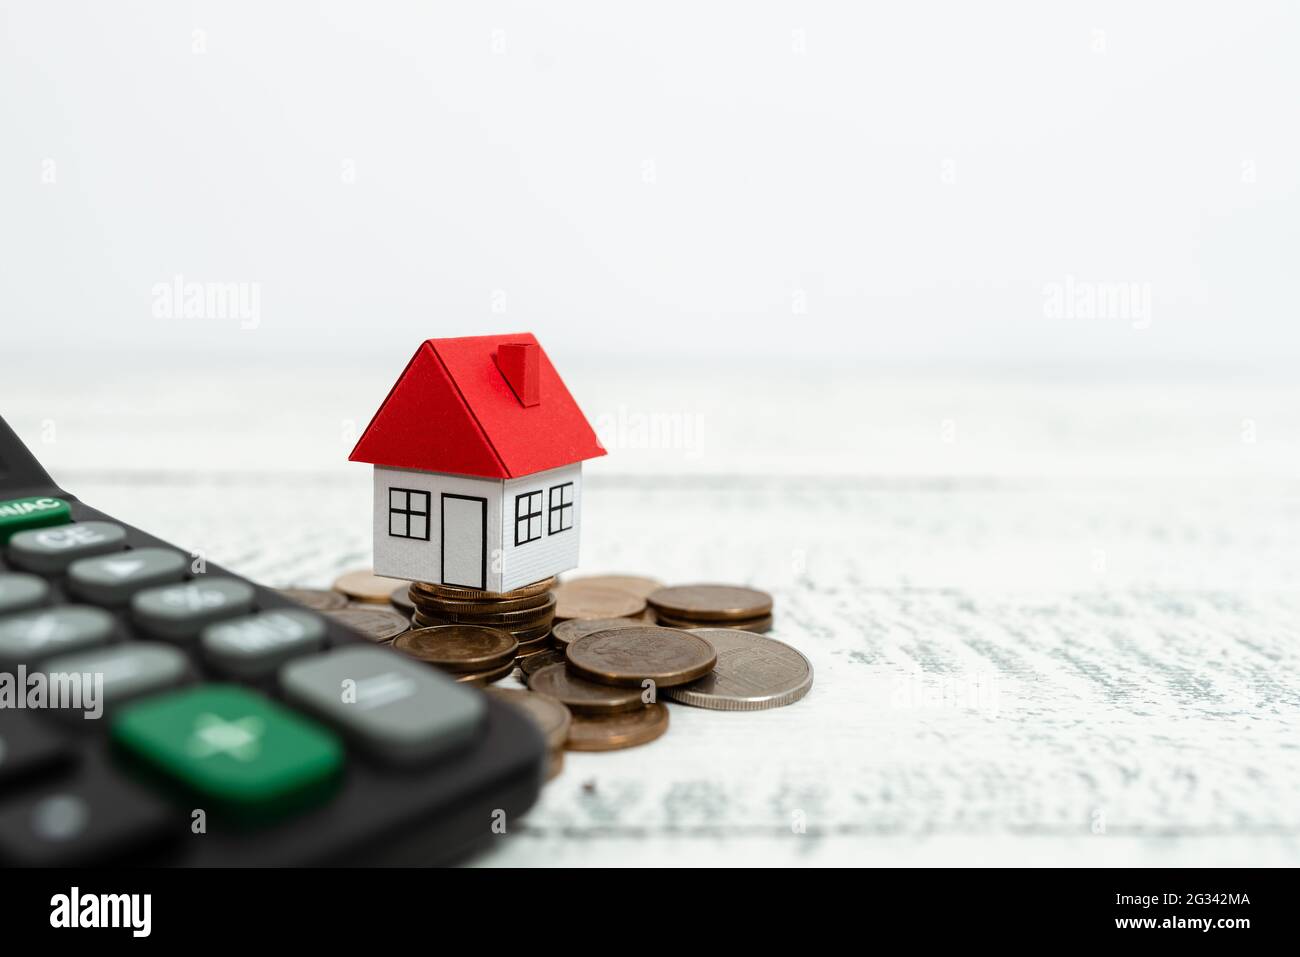 Allocating Savings Buy New Property, Saving Money Build House, Presenting  House Sale Deal, Real Estate Business Ideas, Home Expansion Costs, Housing  Stock Photo - Alamy